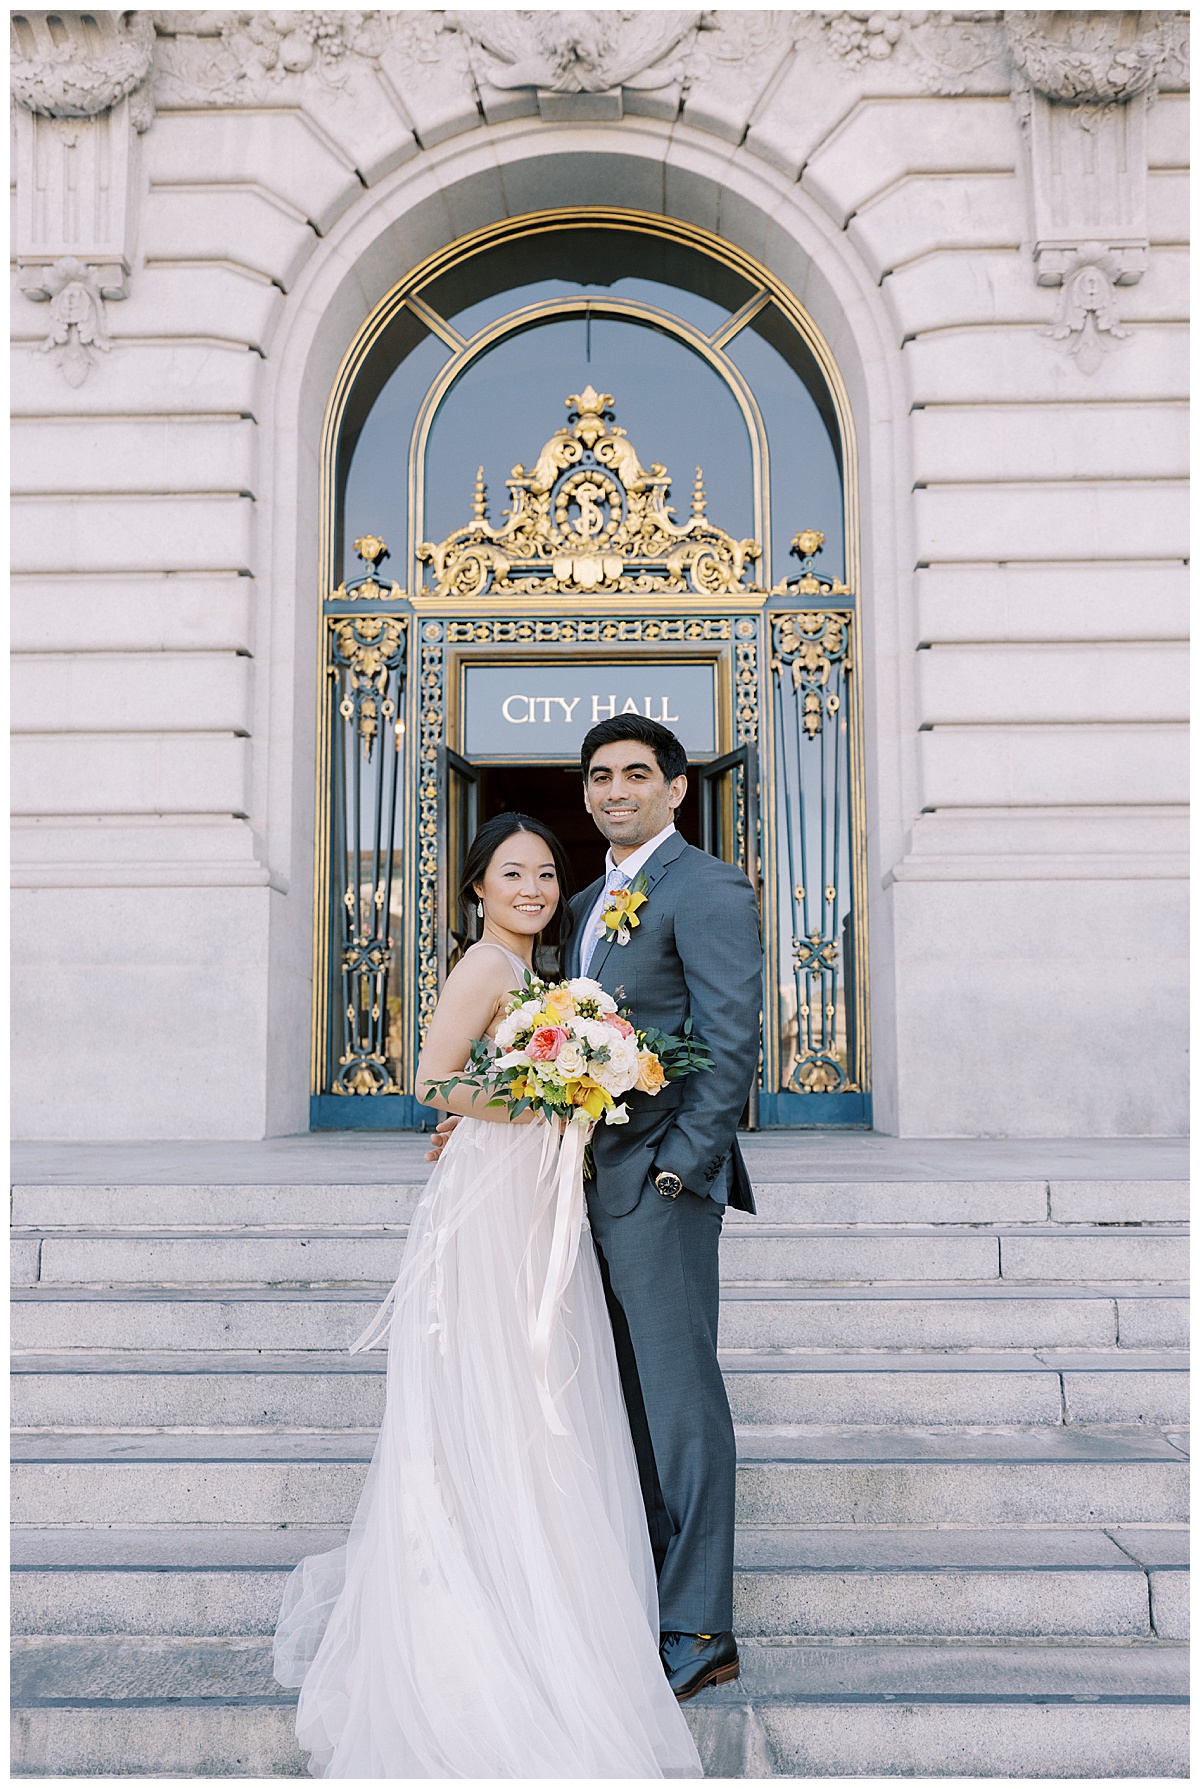 Mary and Ashir's elopement ceremony couple's portraits